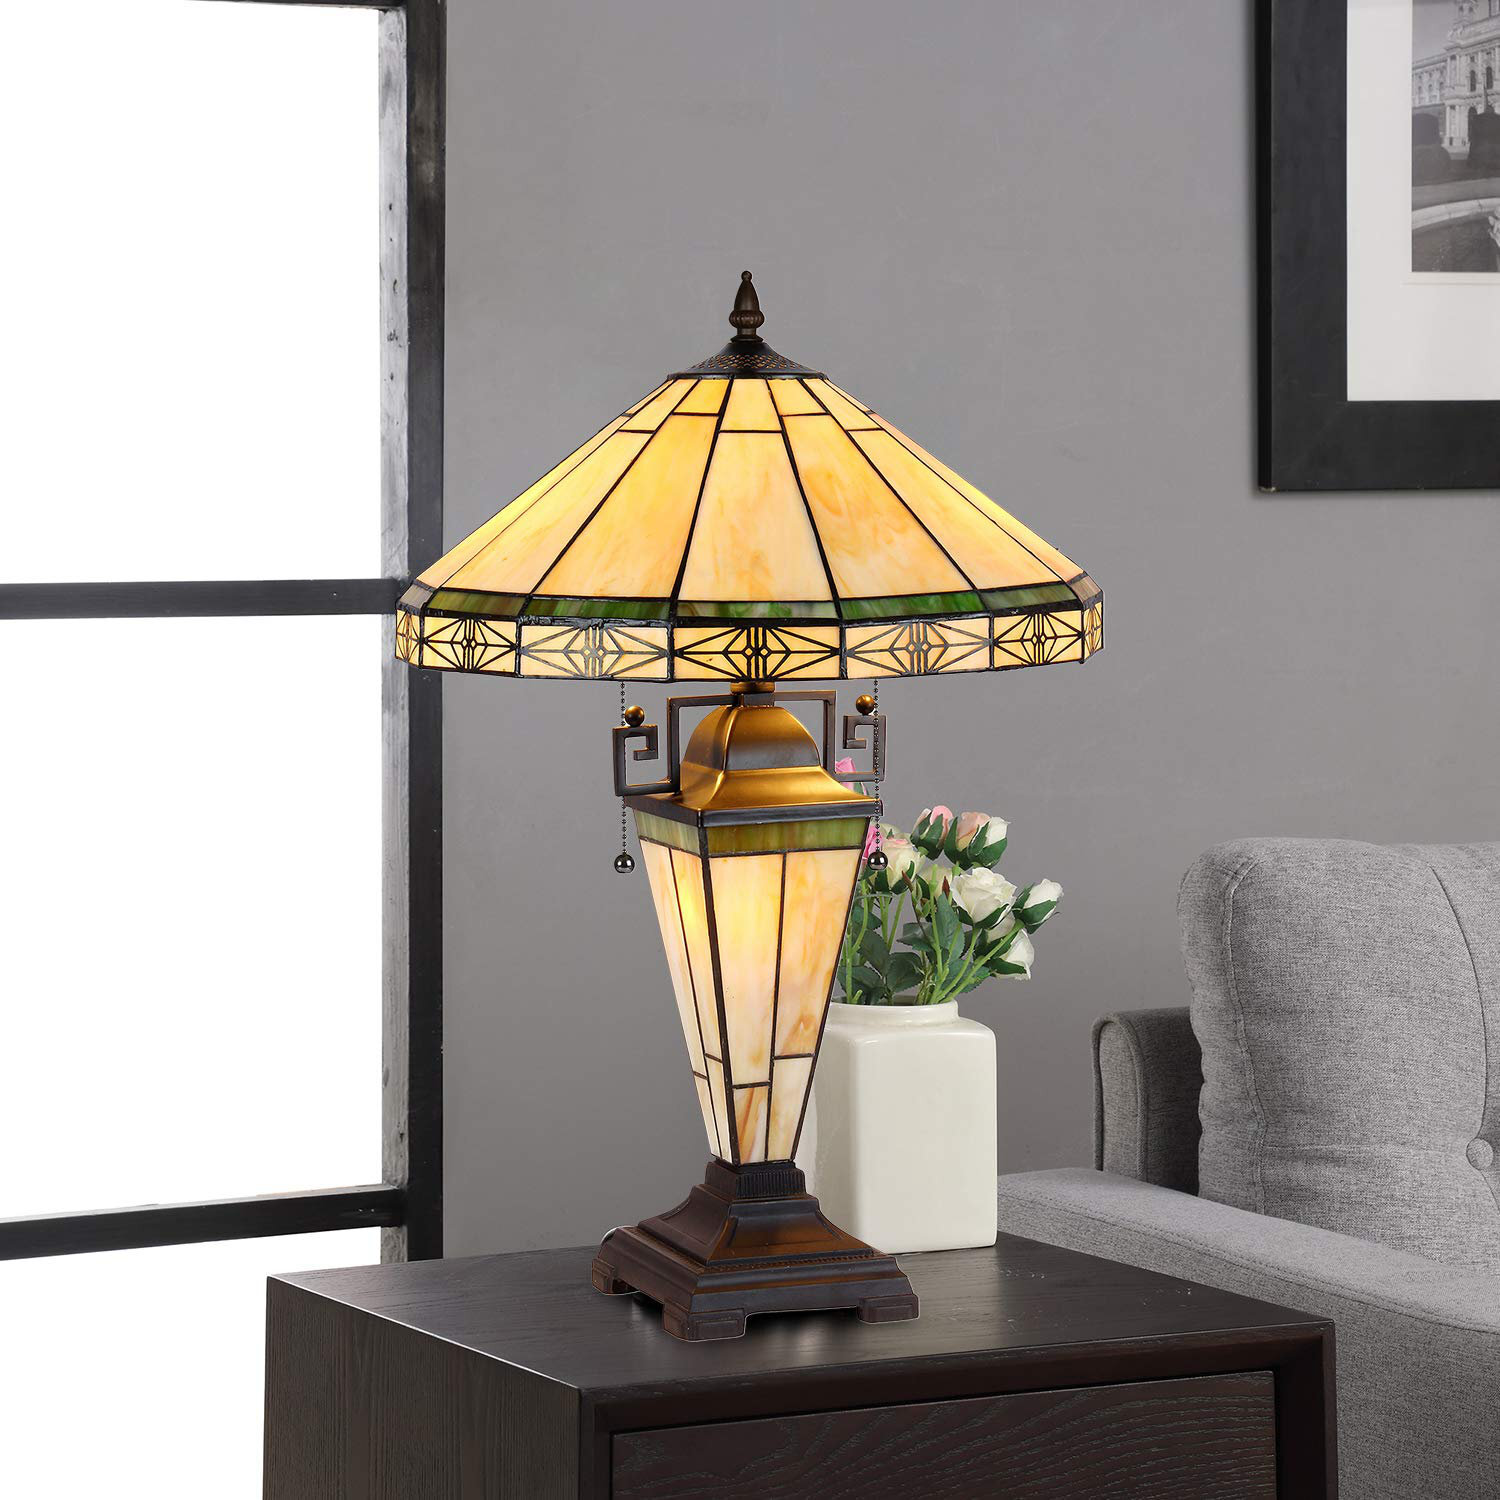 Tiffany Large Table Lamp 3-Light With Nightlight Mission Rustic Style Desk Light Decor